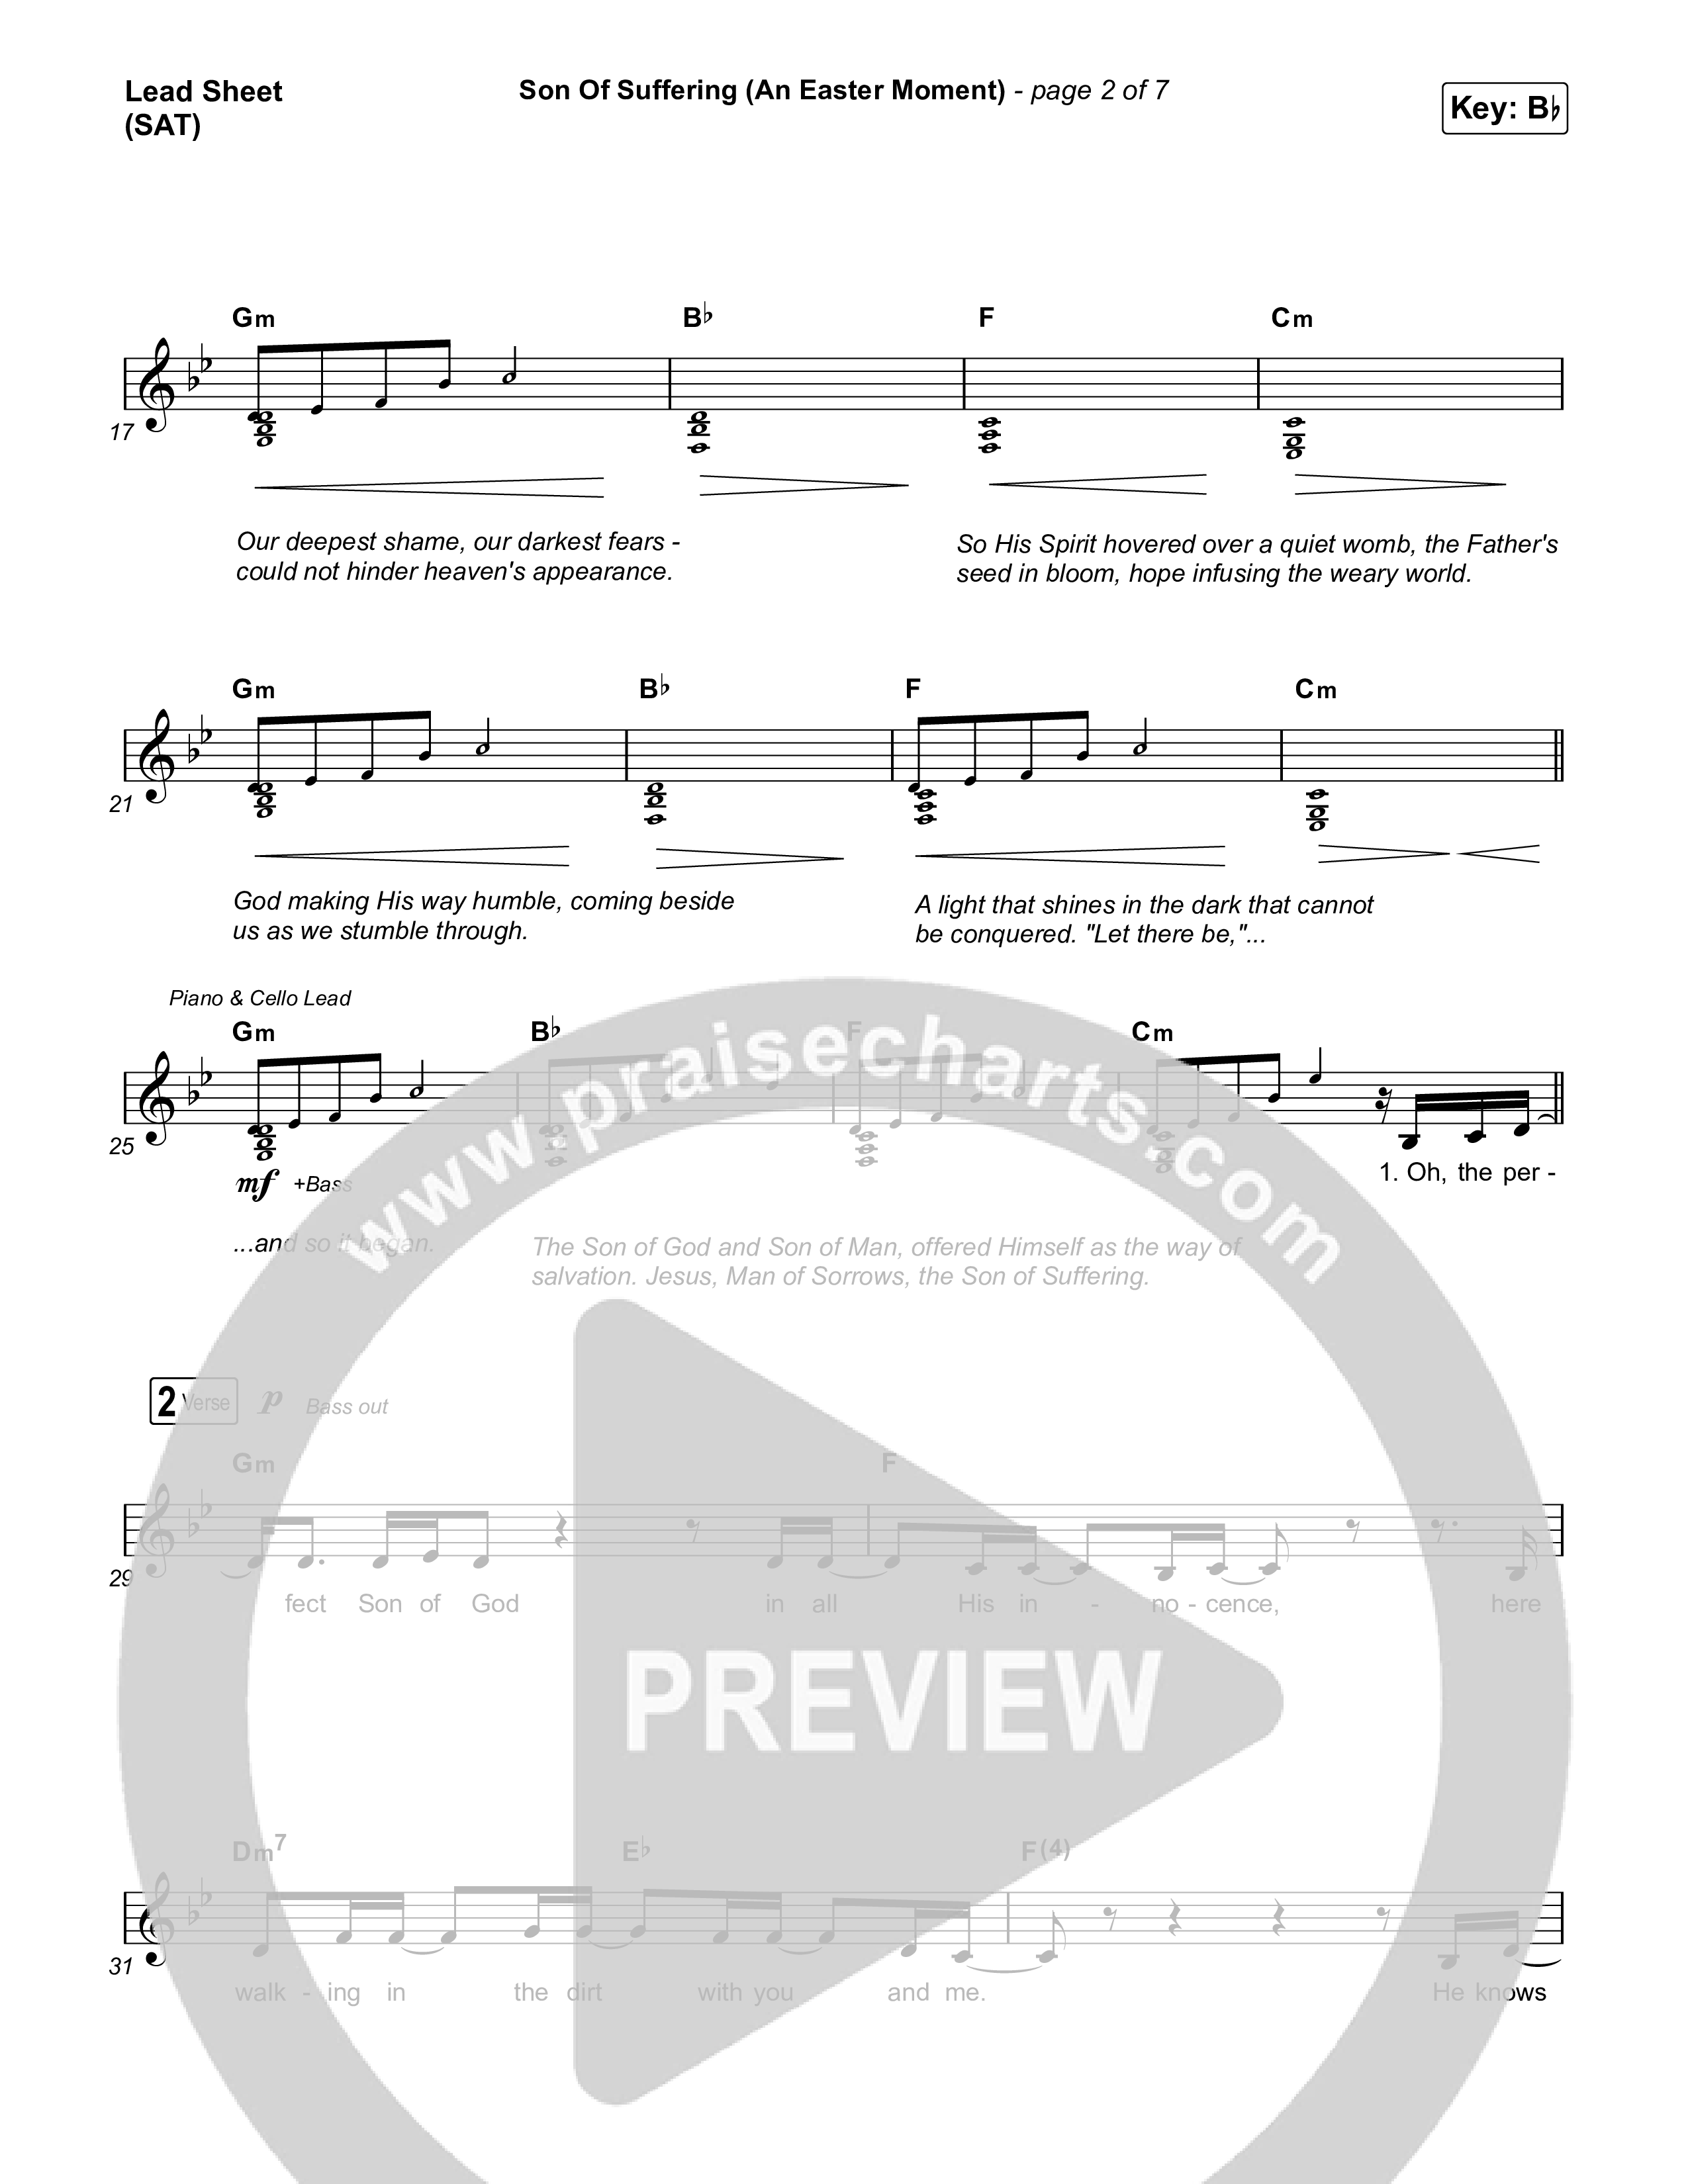 Son Of Suffering (An Easter Moment) Lead Sheet (SAT) (Travis Cottrell / Arr. Mason Brown)